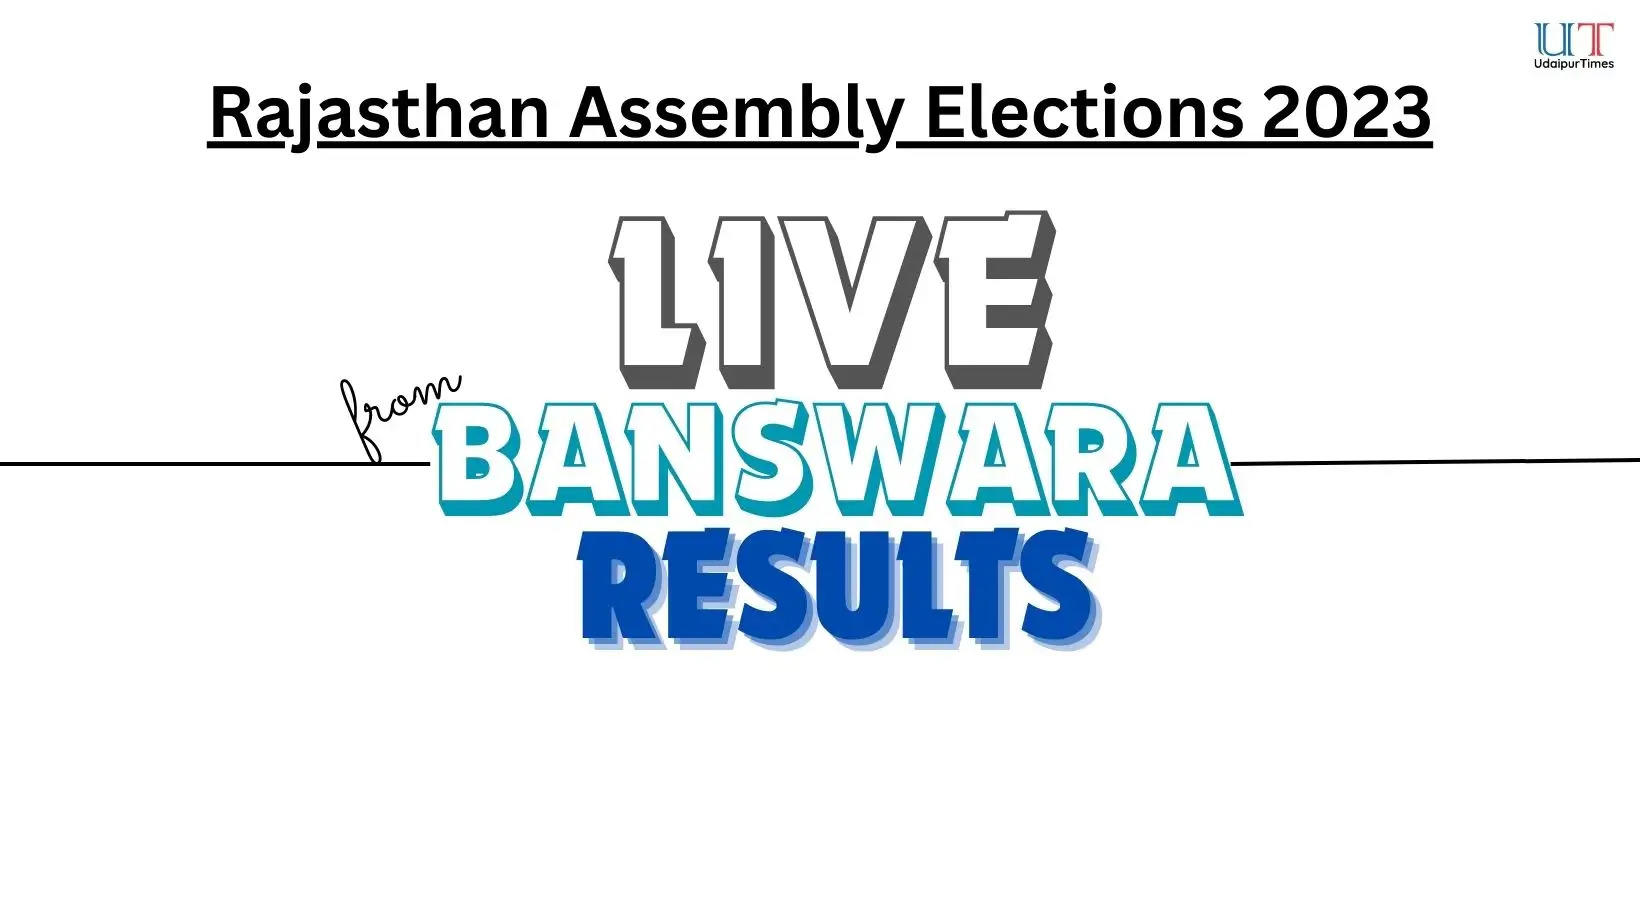 Live Election Results from Banswara Live Rajasthan Assembly ELections 2023